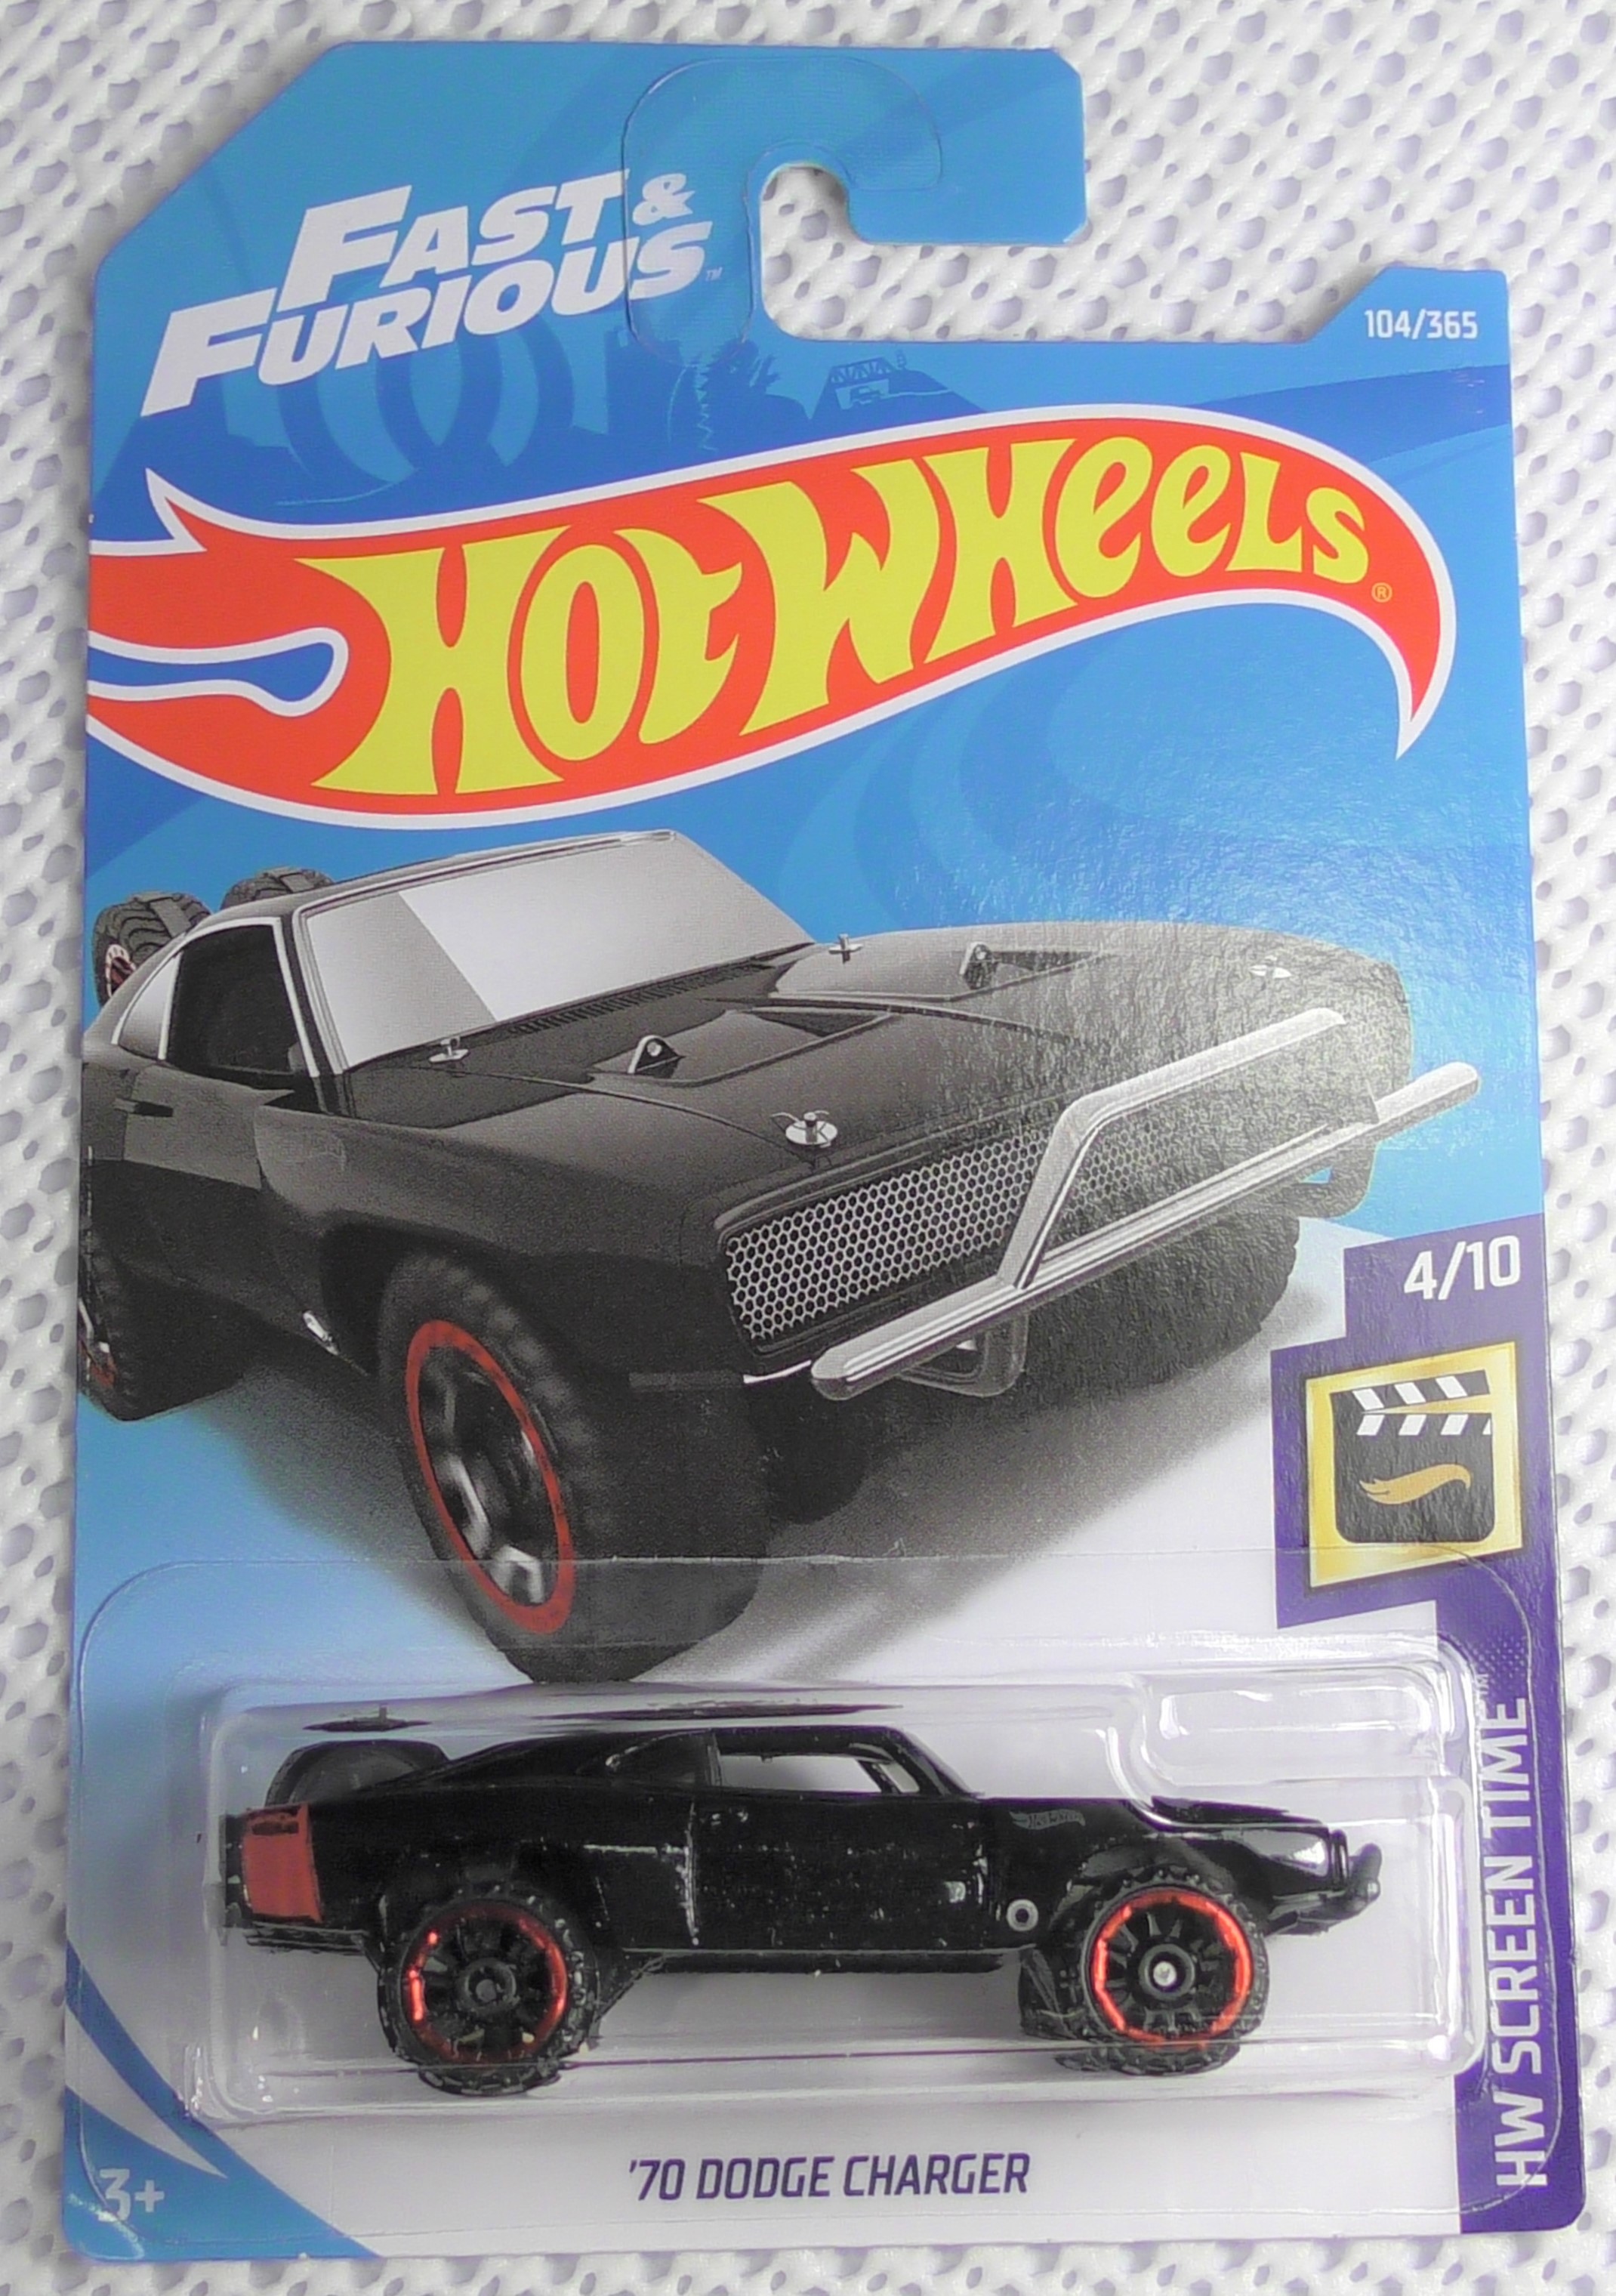 2018-104 - Hall's Guide for Hot Wheels Collectors